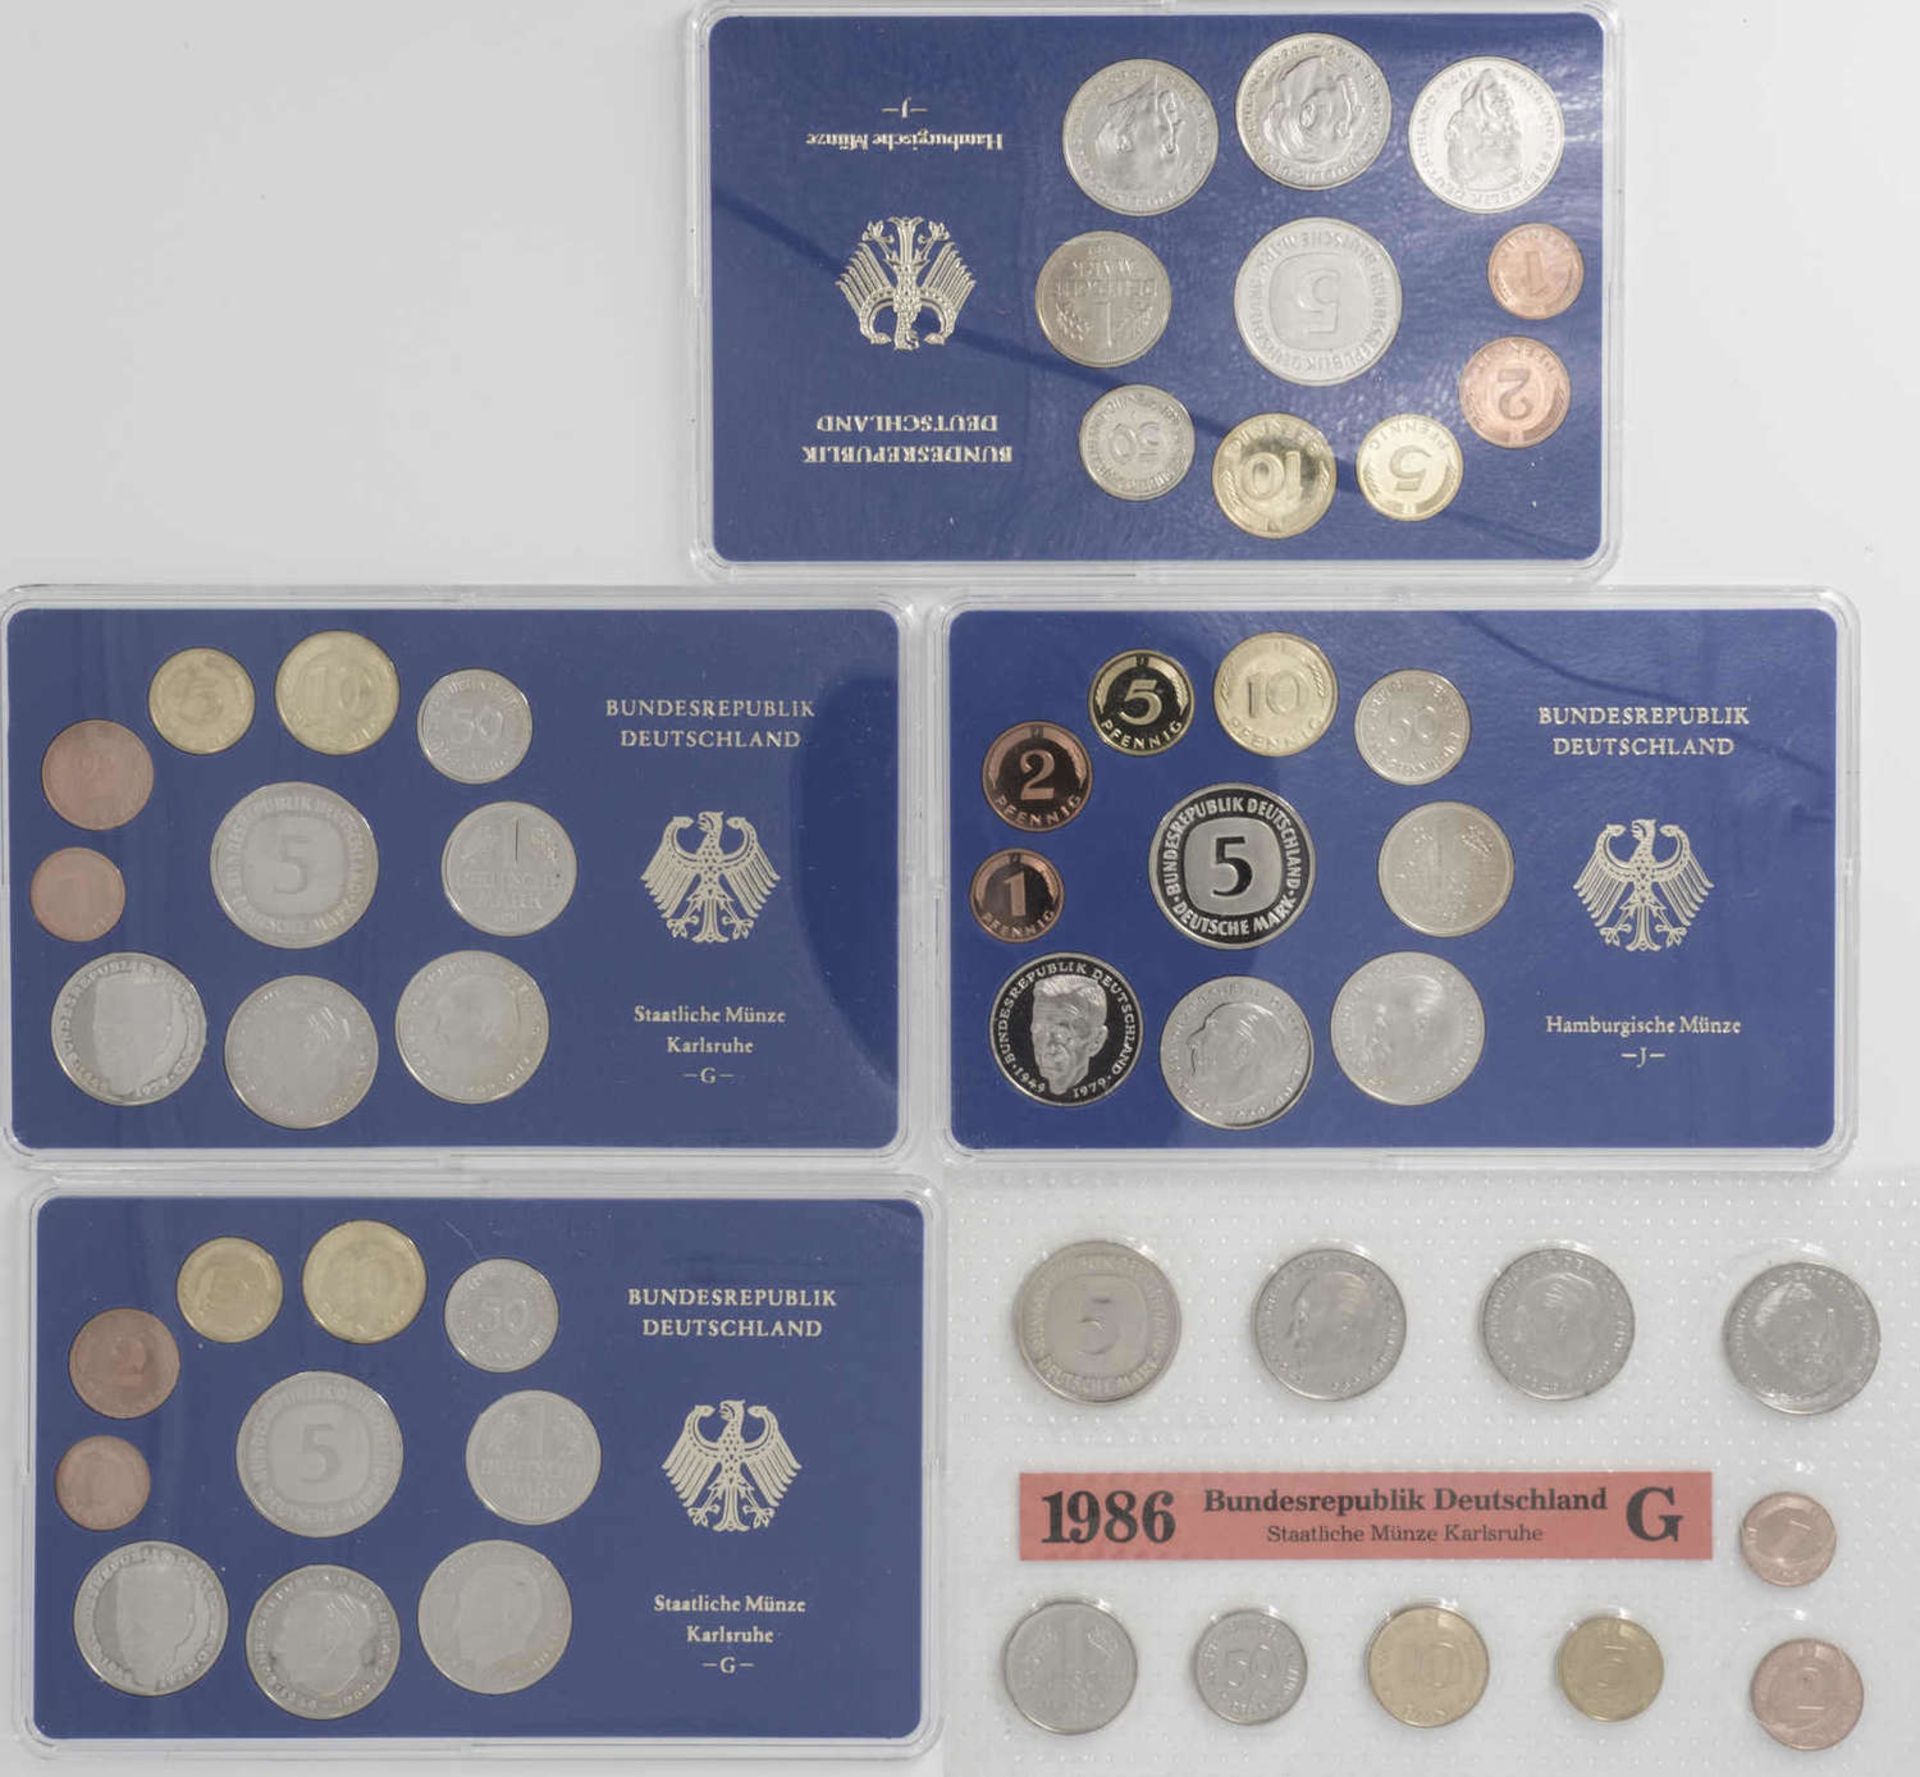 BRD 1981, coin sets 2 x G and 2 x J, Proof. In addition 1986 G course coin set, BU. - Image 2 of 2